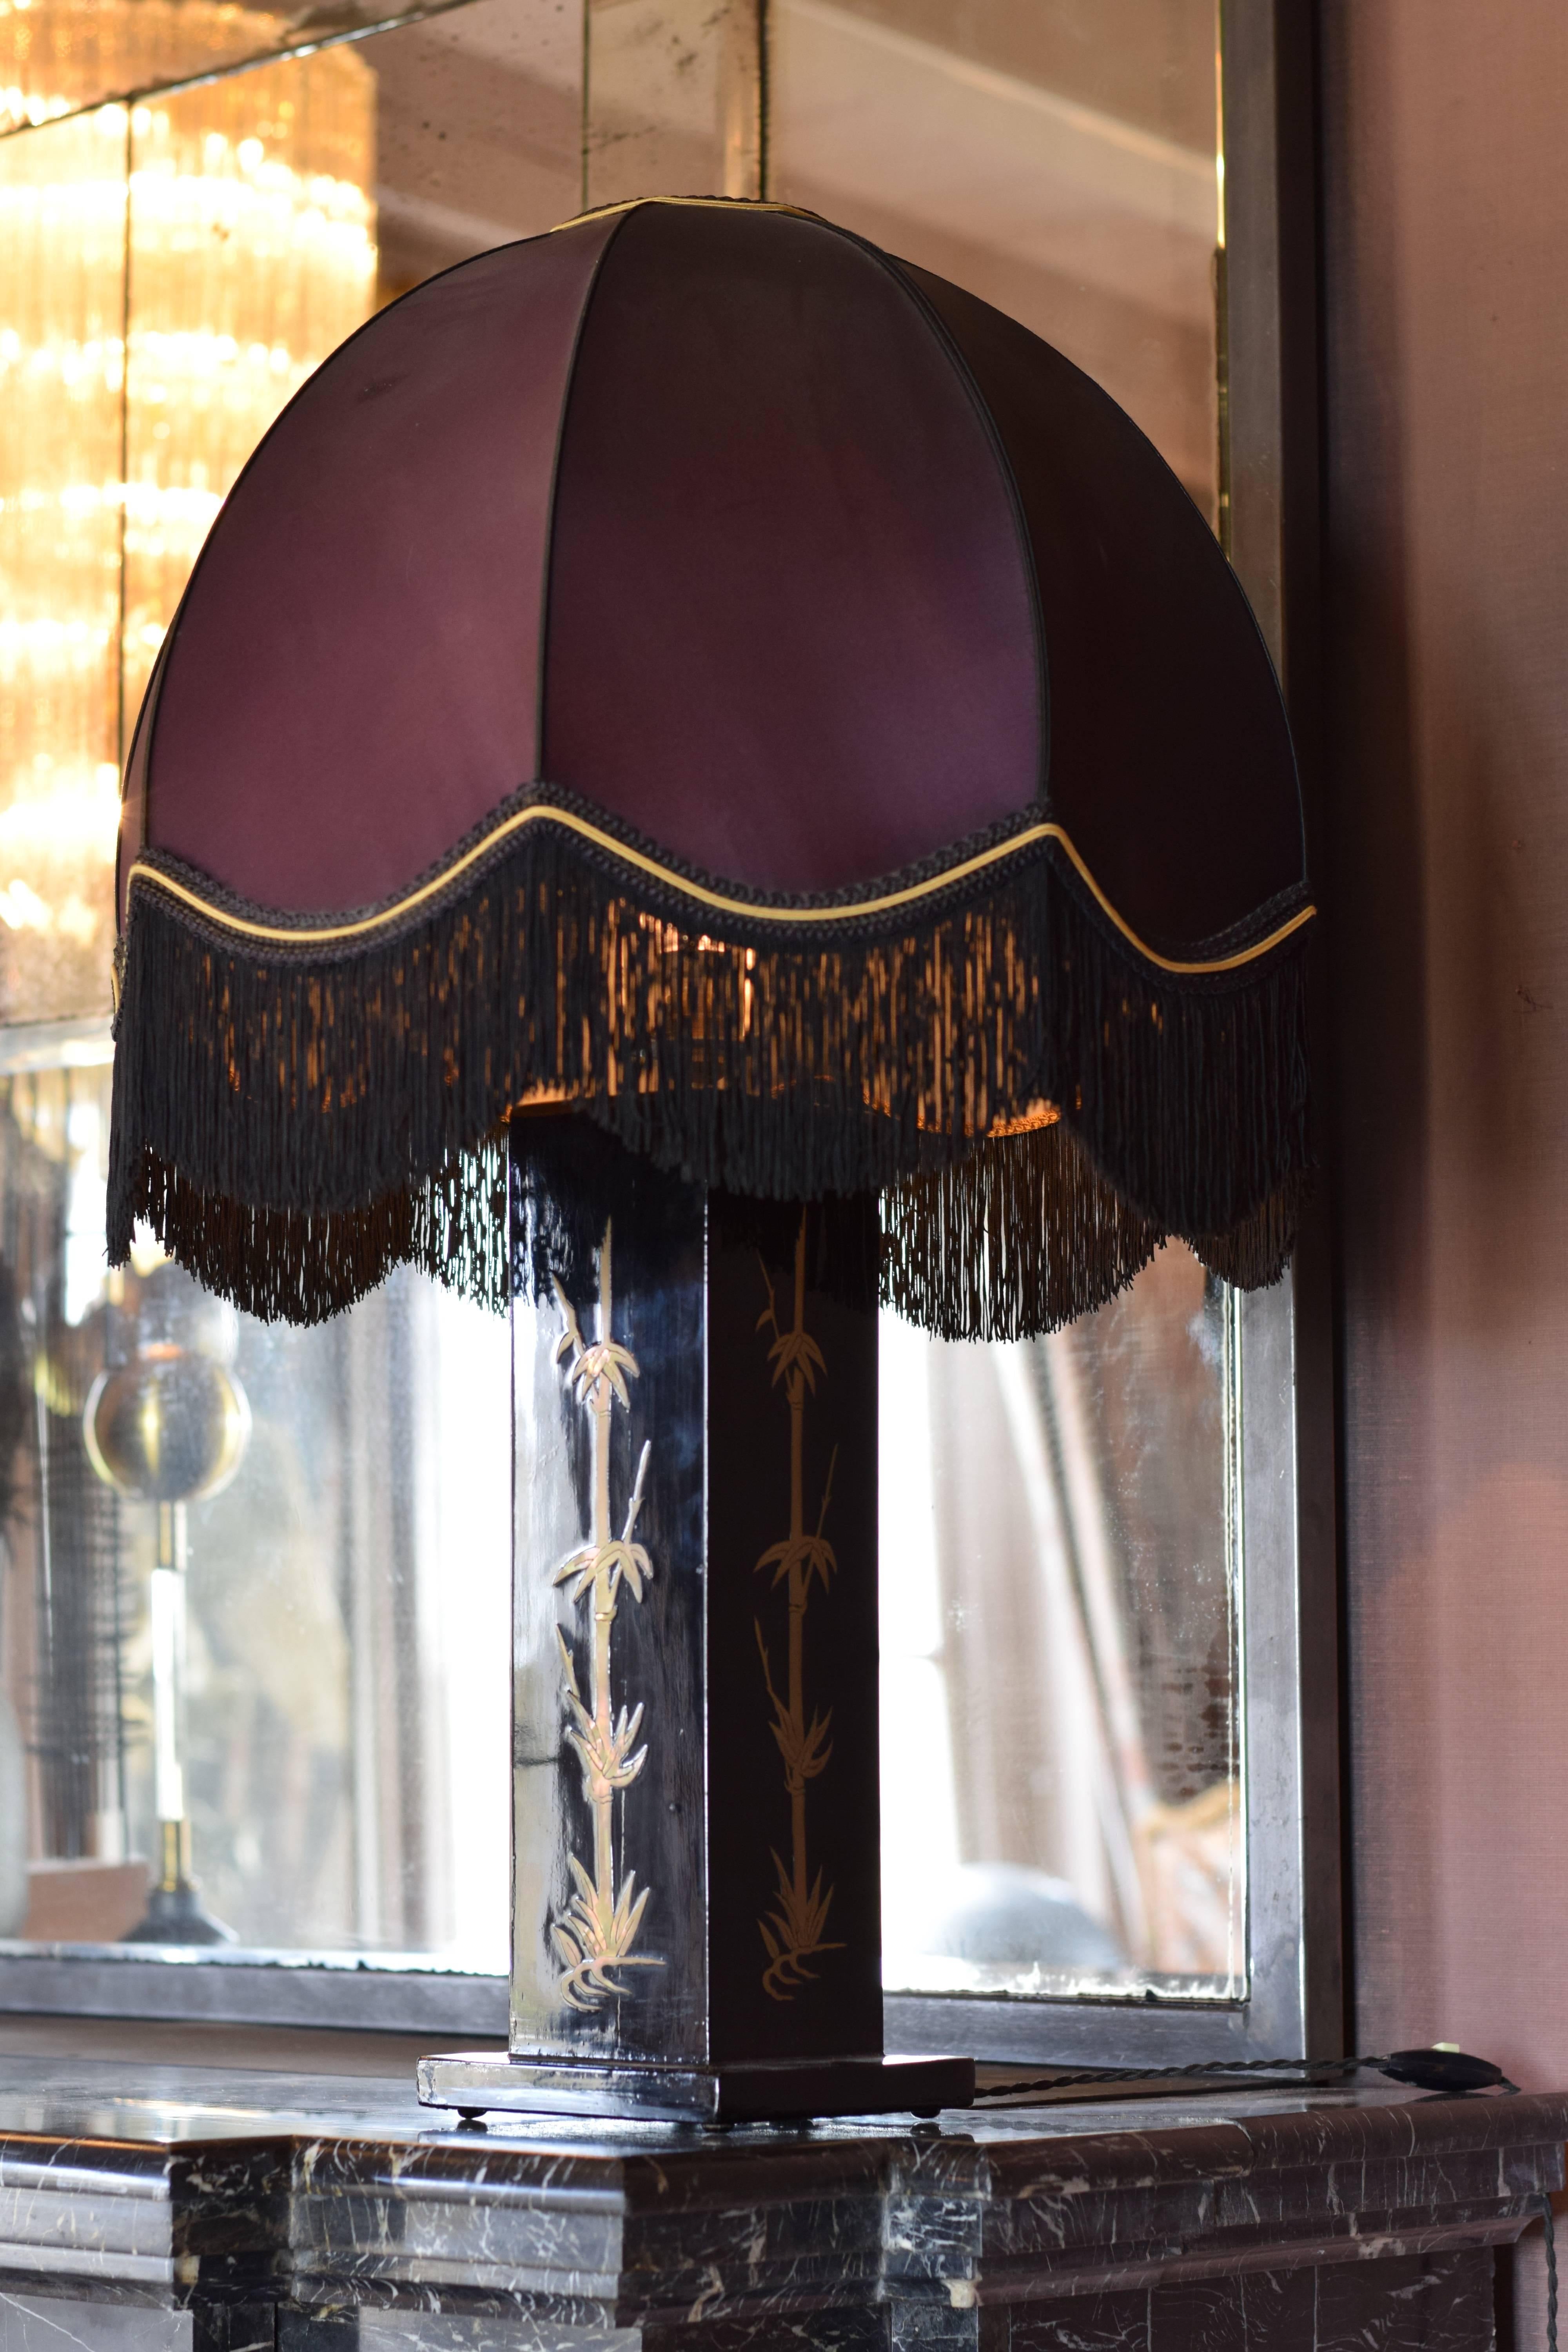 1970s table lamp on Japanese lacquer foot in the style of Jean Claude Mahey.
The lampshade has beautiful fringing. The fabric is in a good condition, although some slight discoloration can be noticed.